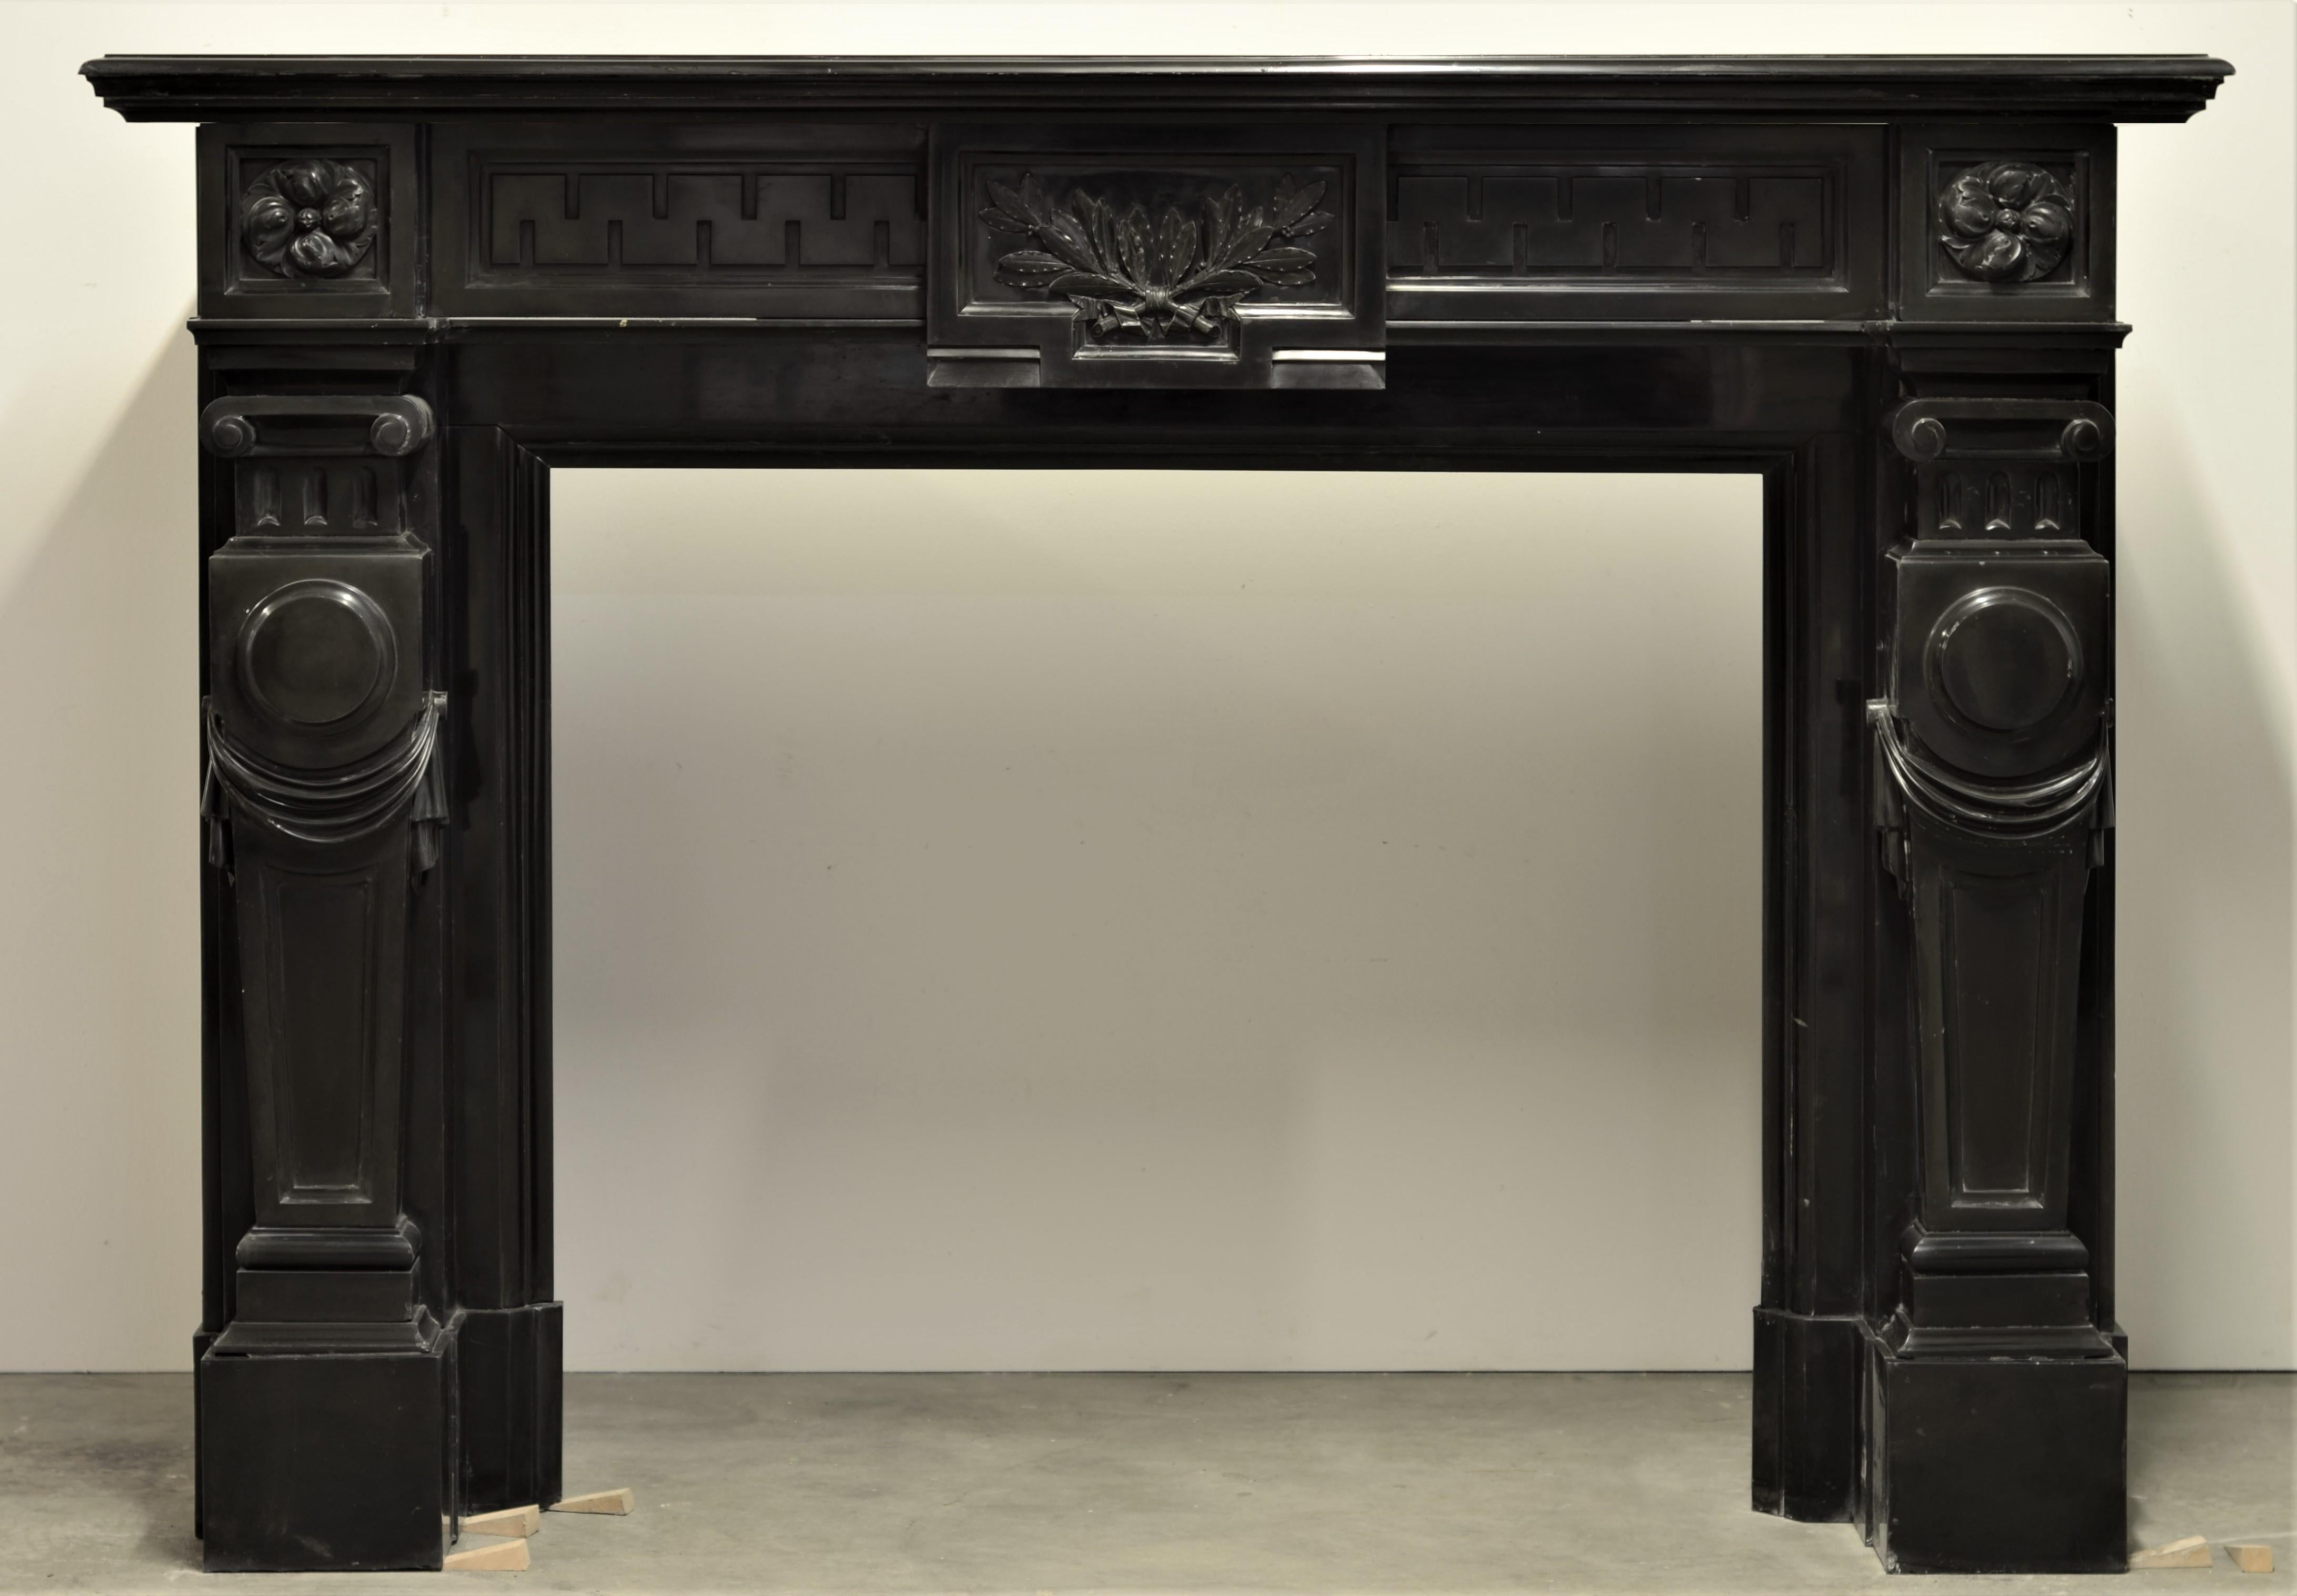 Monumental black marble Louis XVI fireplace mantel

Very impressive 19th century Louis XVI fireplace mantel in Belgian black marble.
The delicate floral carvings and strong lines make this a true statement piece.

It has the perfect proportions